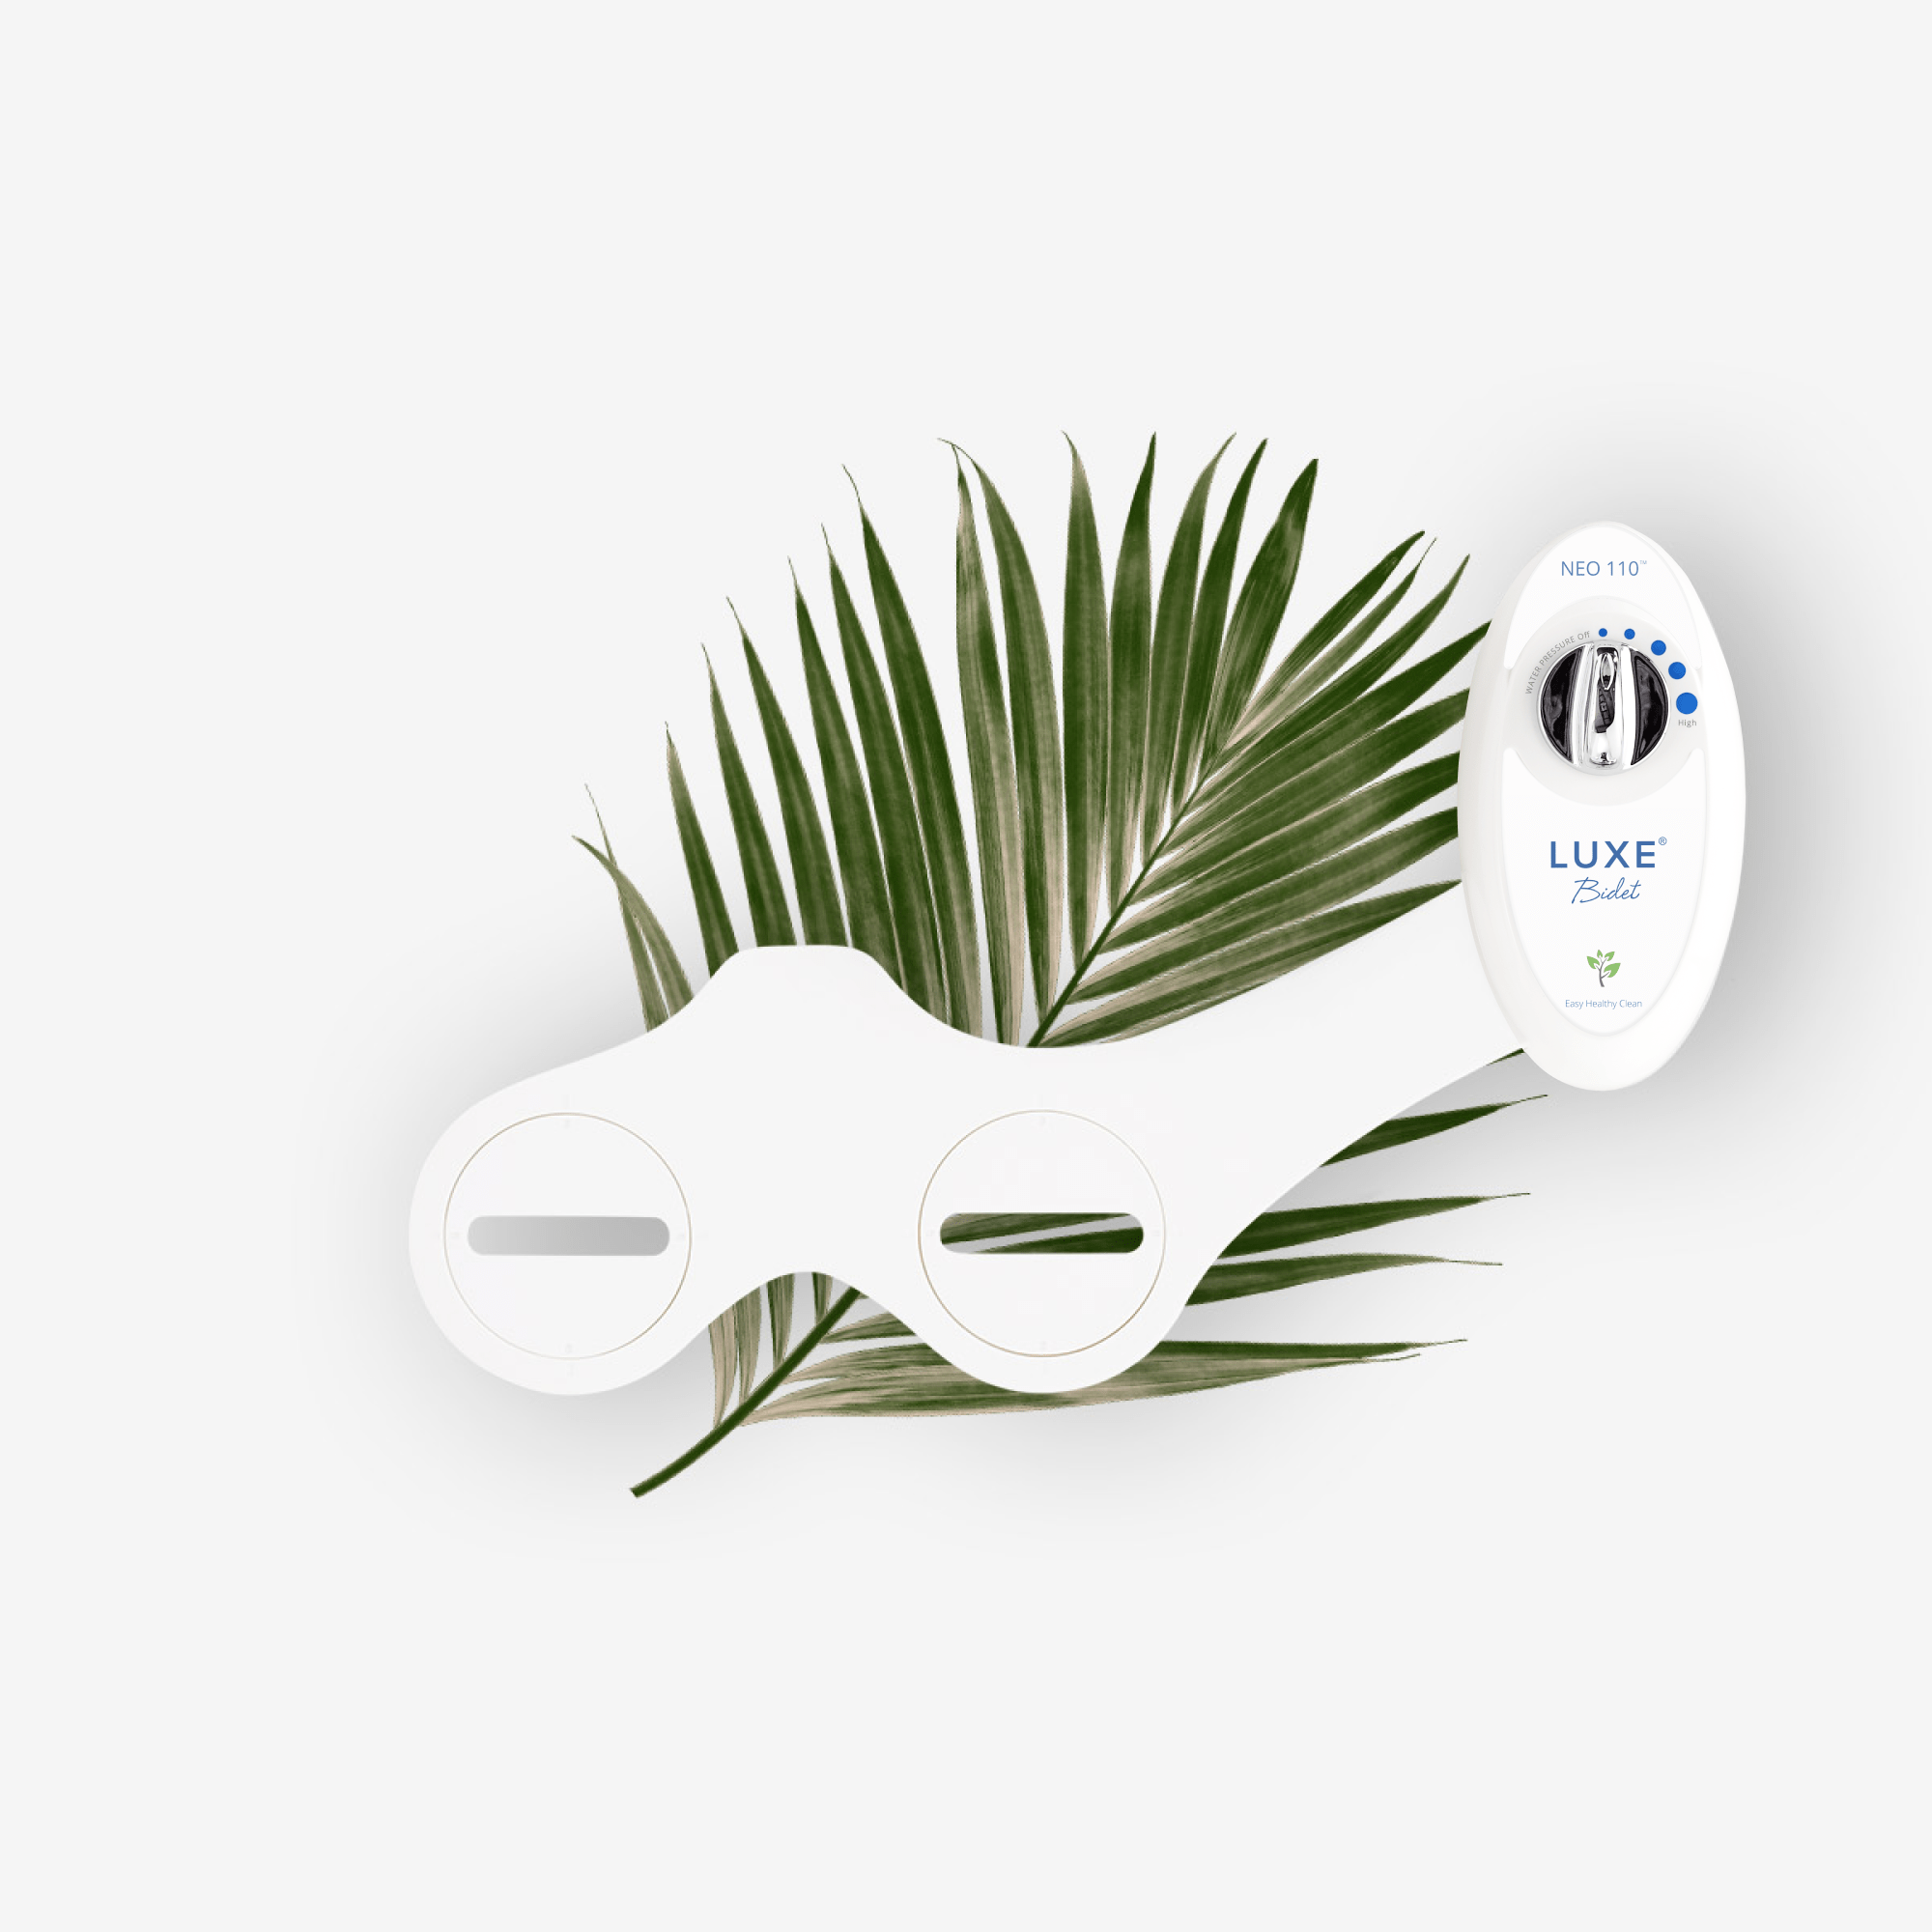 NEO 110: Imperfect Packaging - NEO 110 White bidet body shown with a leaf background